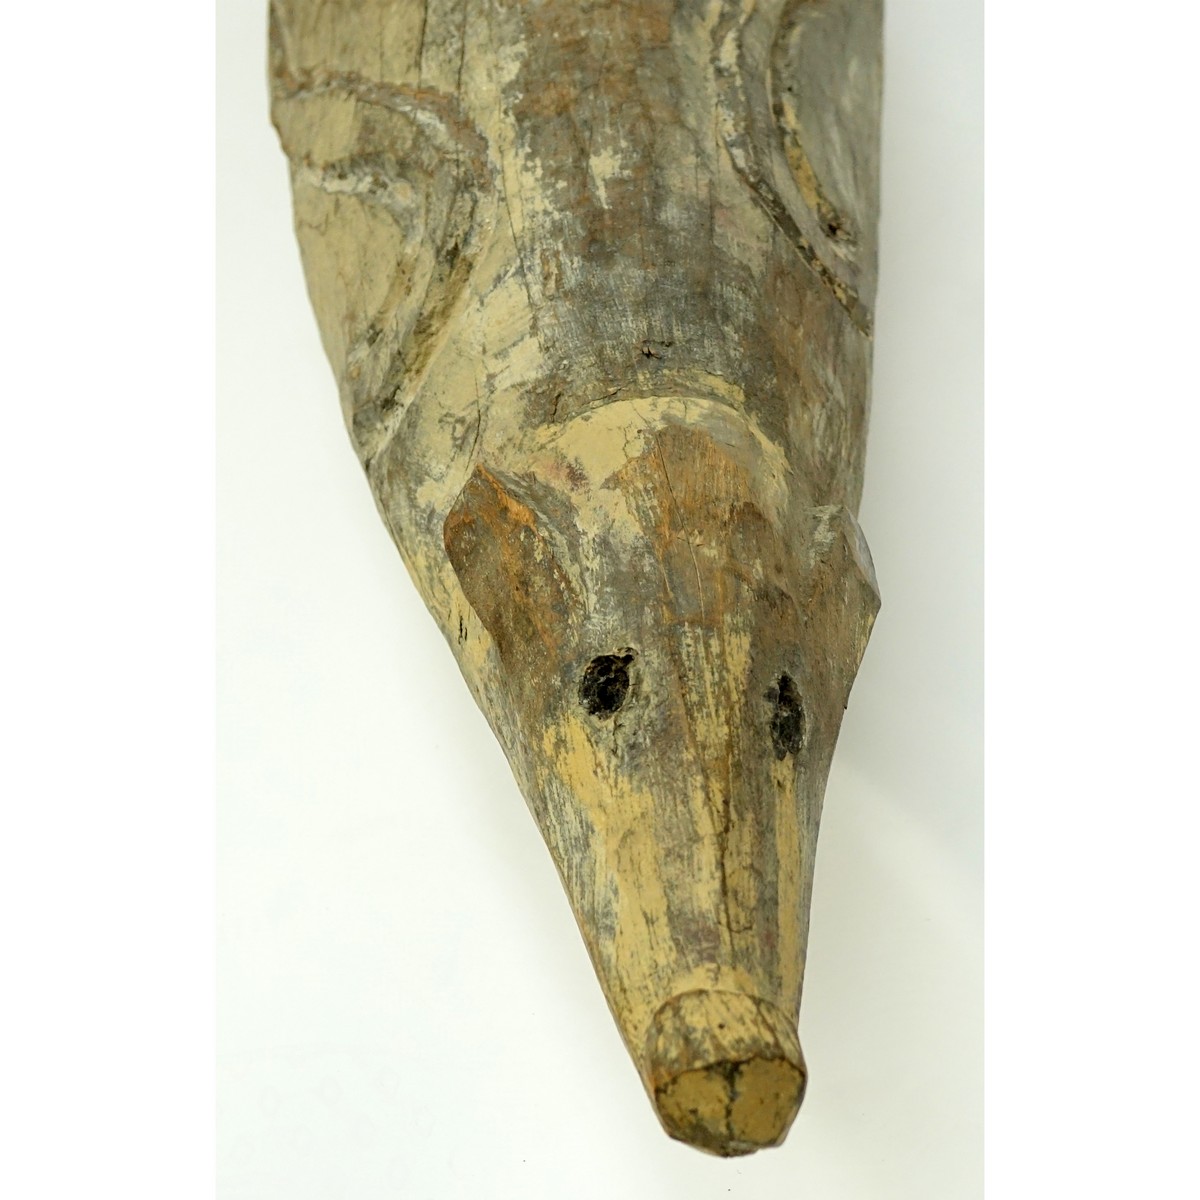 Large Wood Carved African Figural Slit Drum Sculpture, Possibly from the Republic of Congo. Scratches and nicks consistent with age.